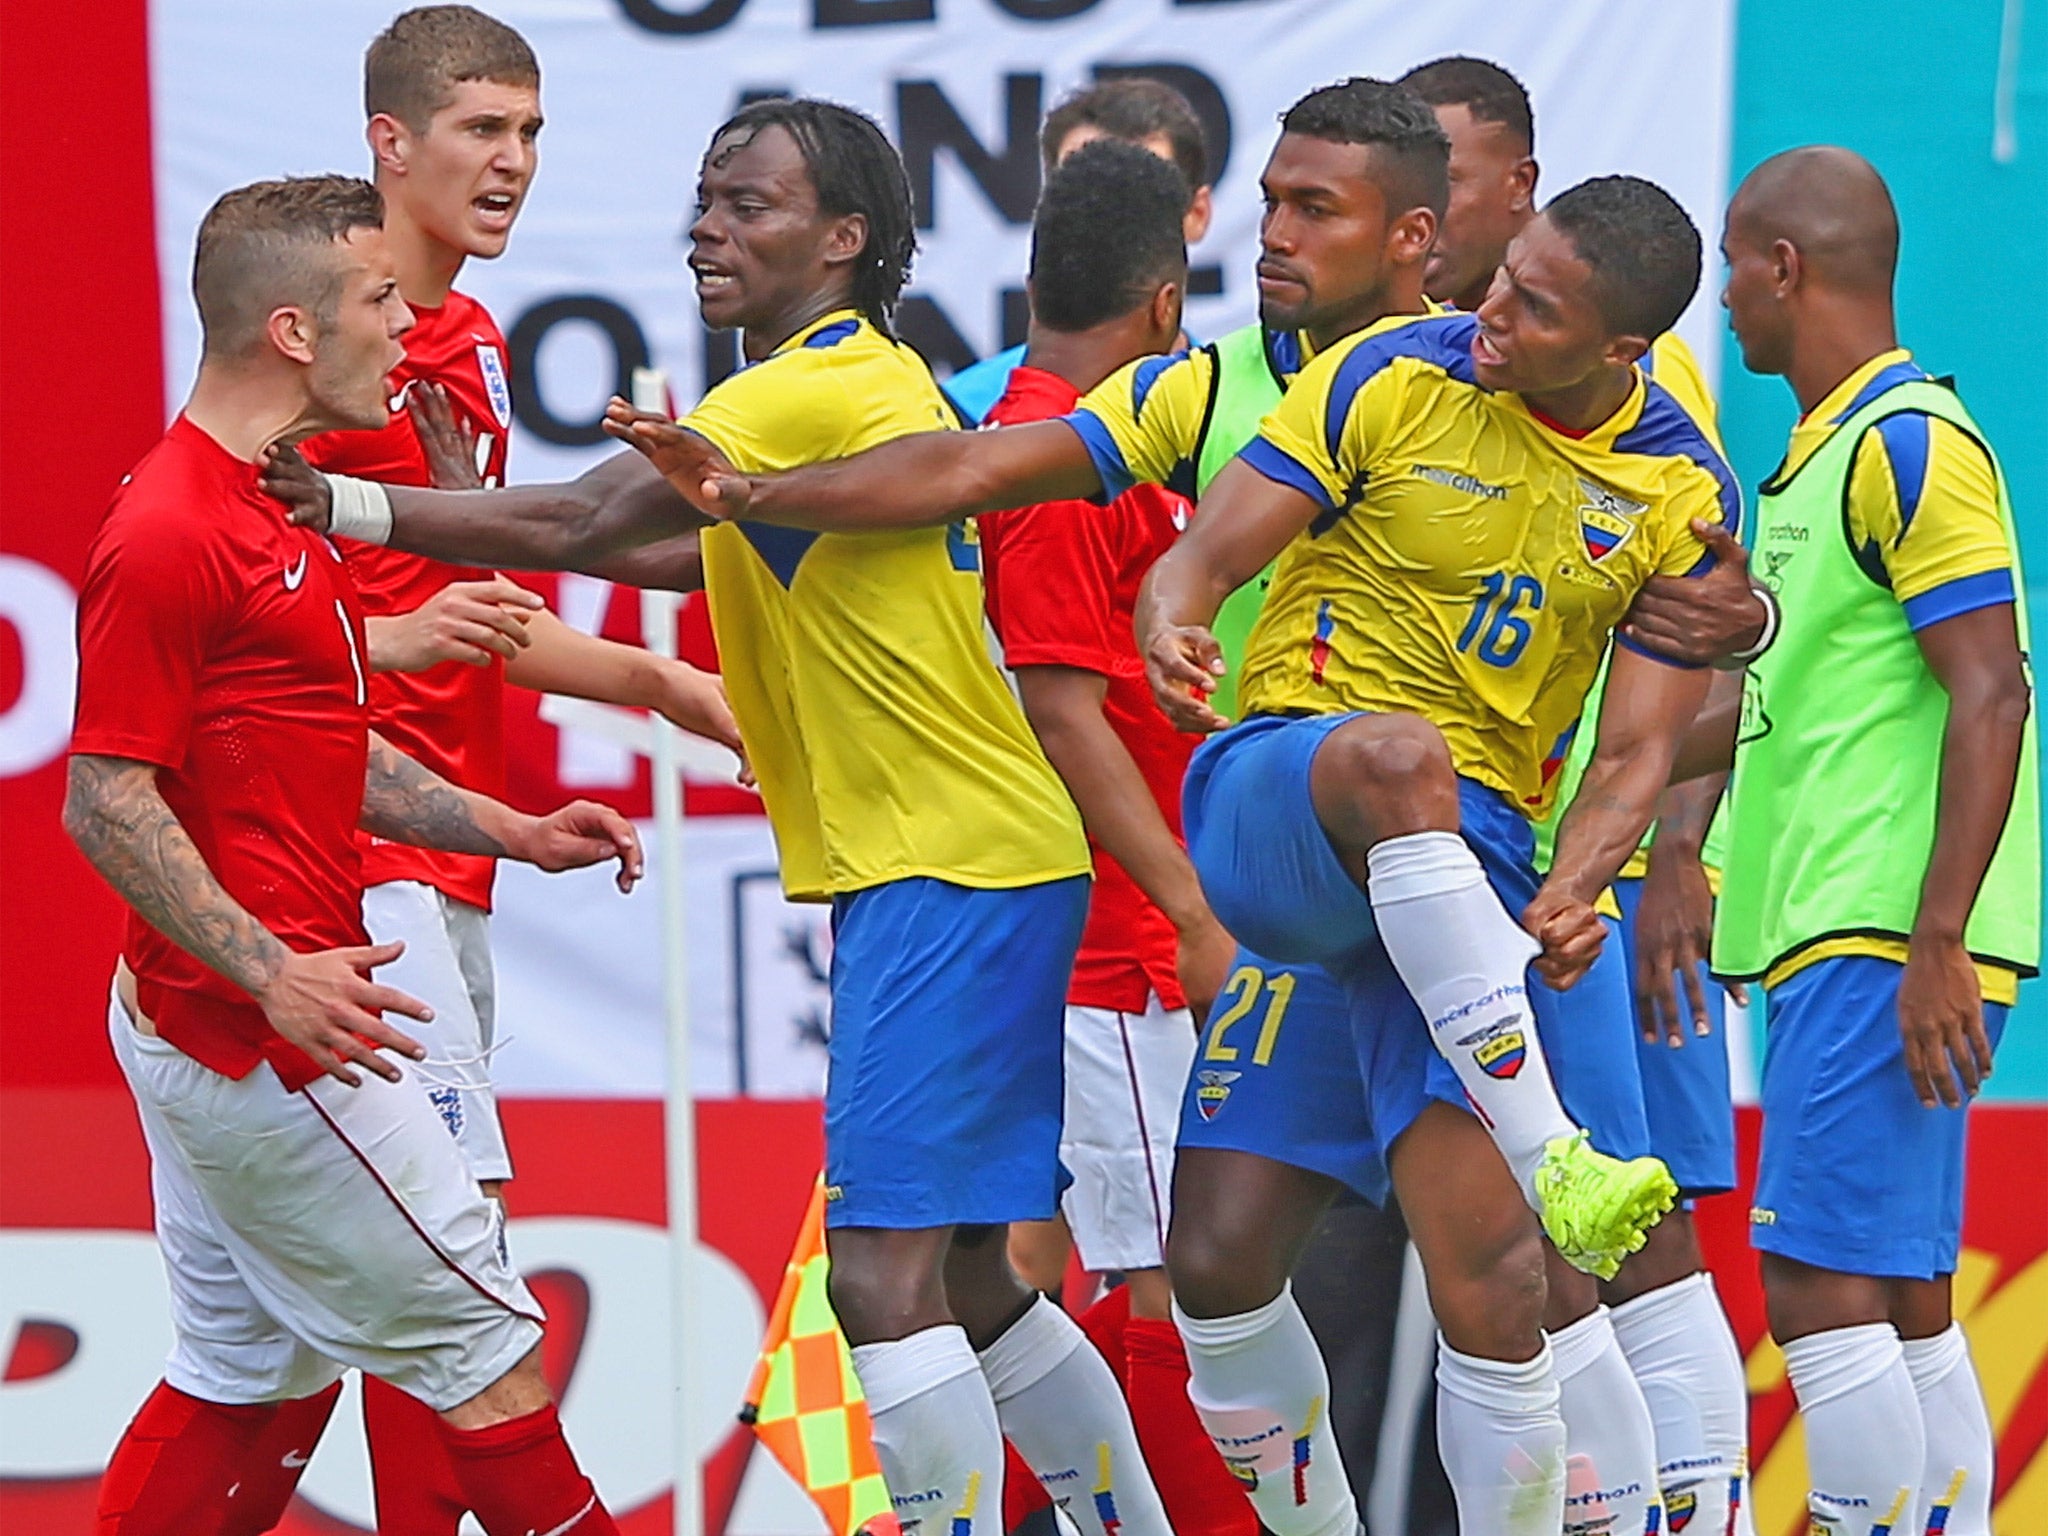 Jack Wilshere confronts Antonio Valencia after his altercation with Raheem Sterling